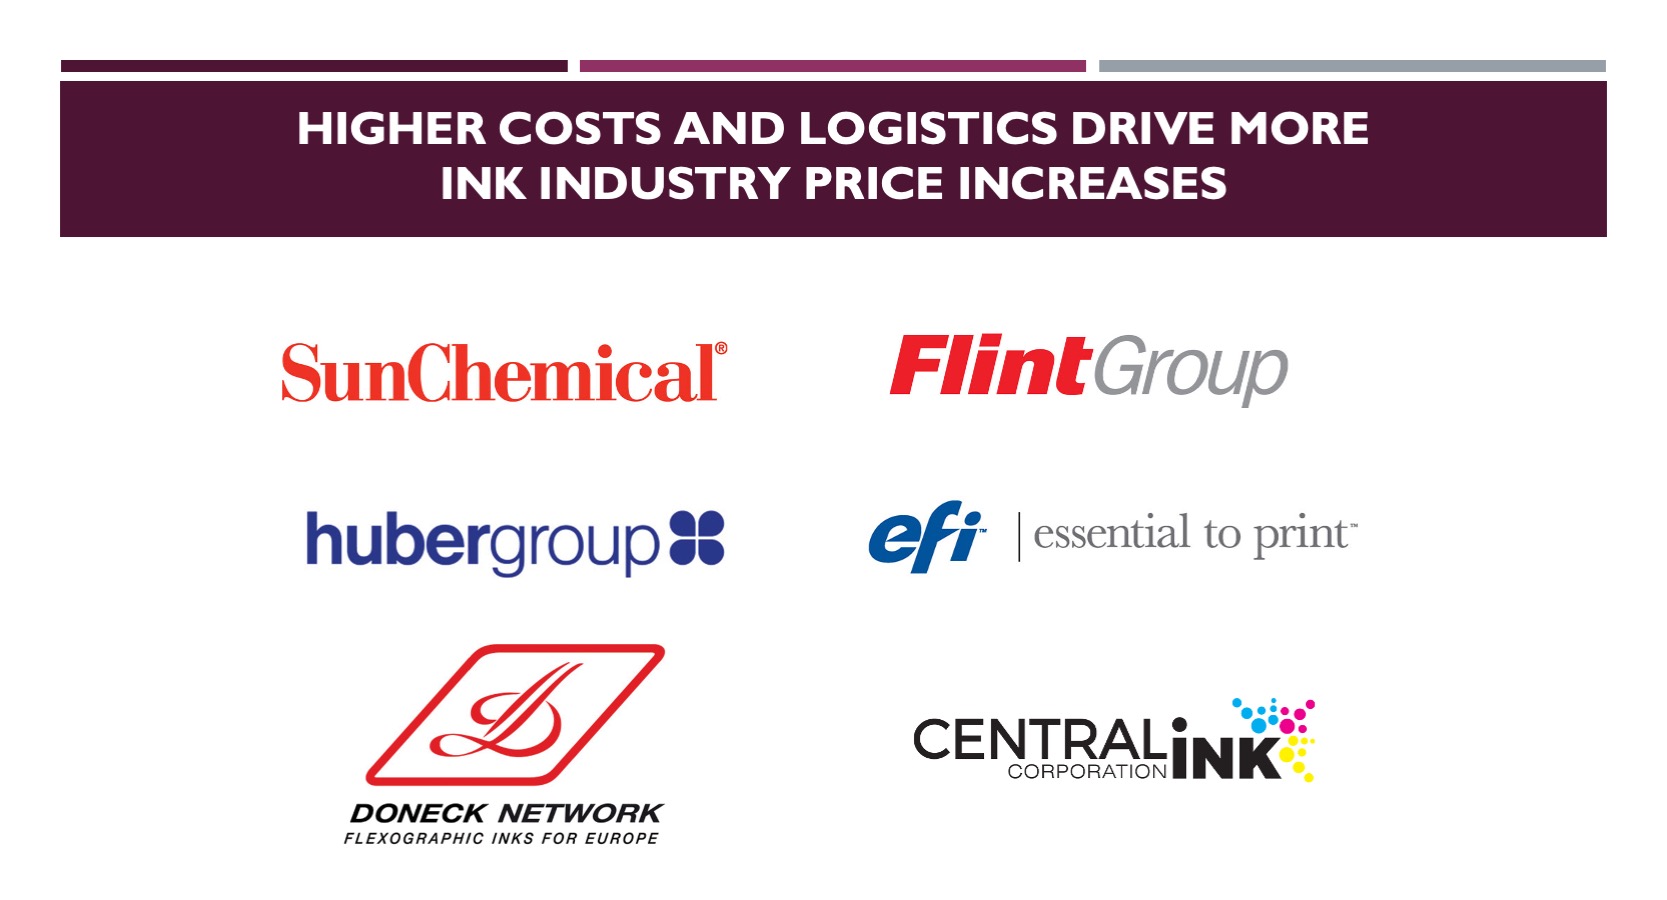 Higher Costs, Logistics Drive More Ink Industry Price Increases